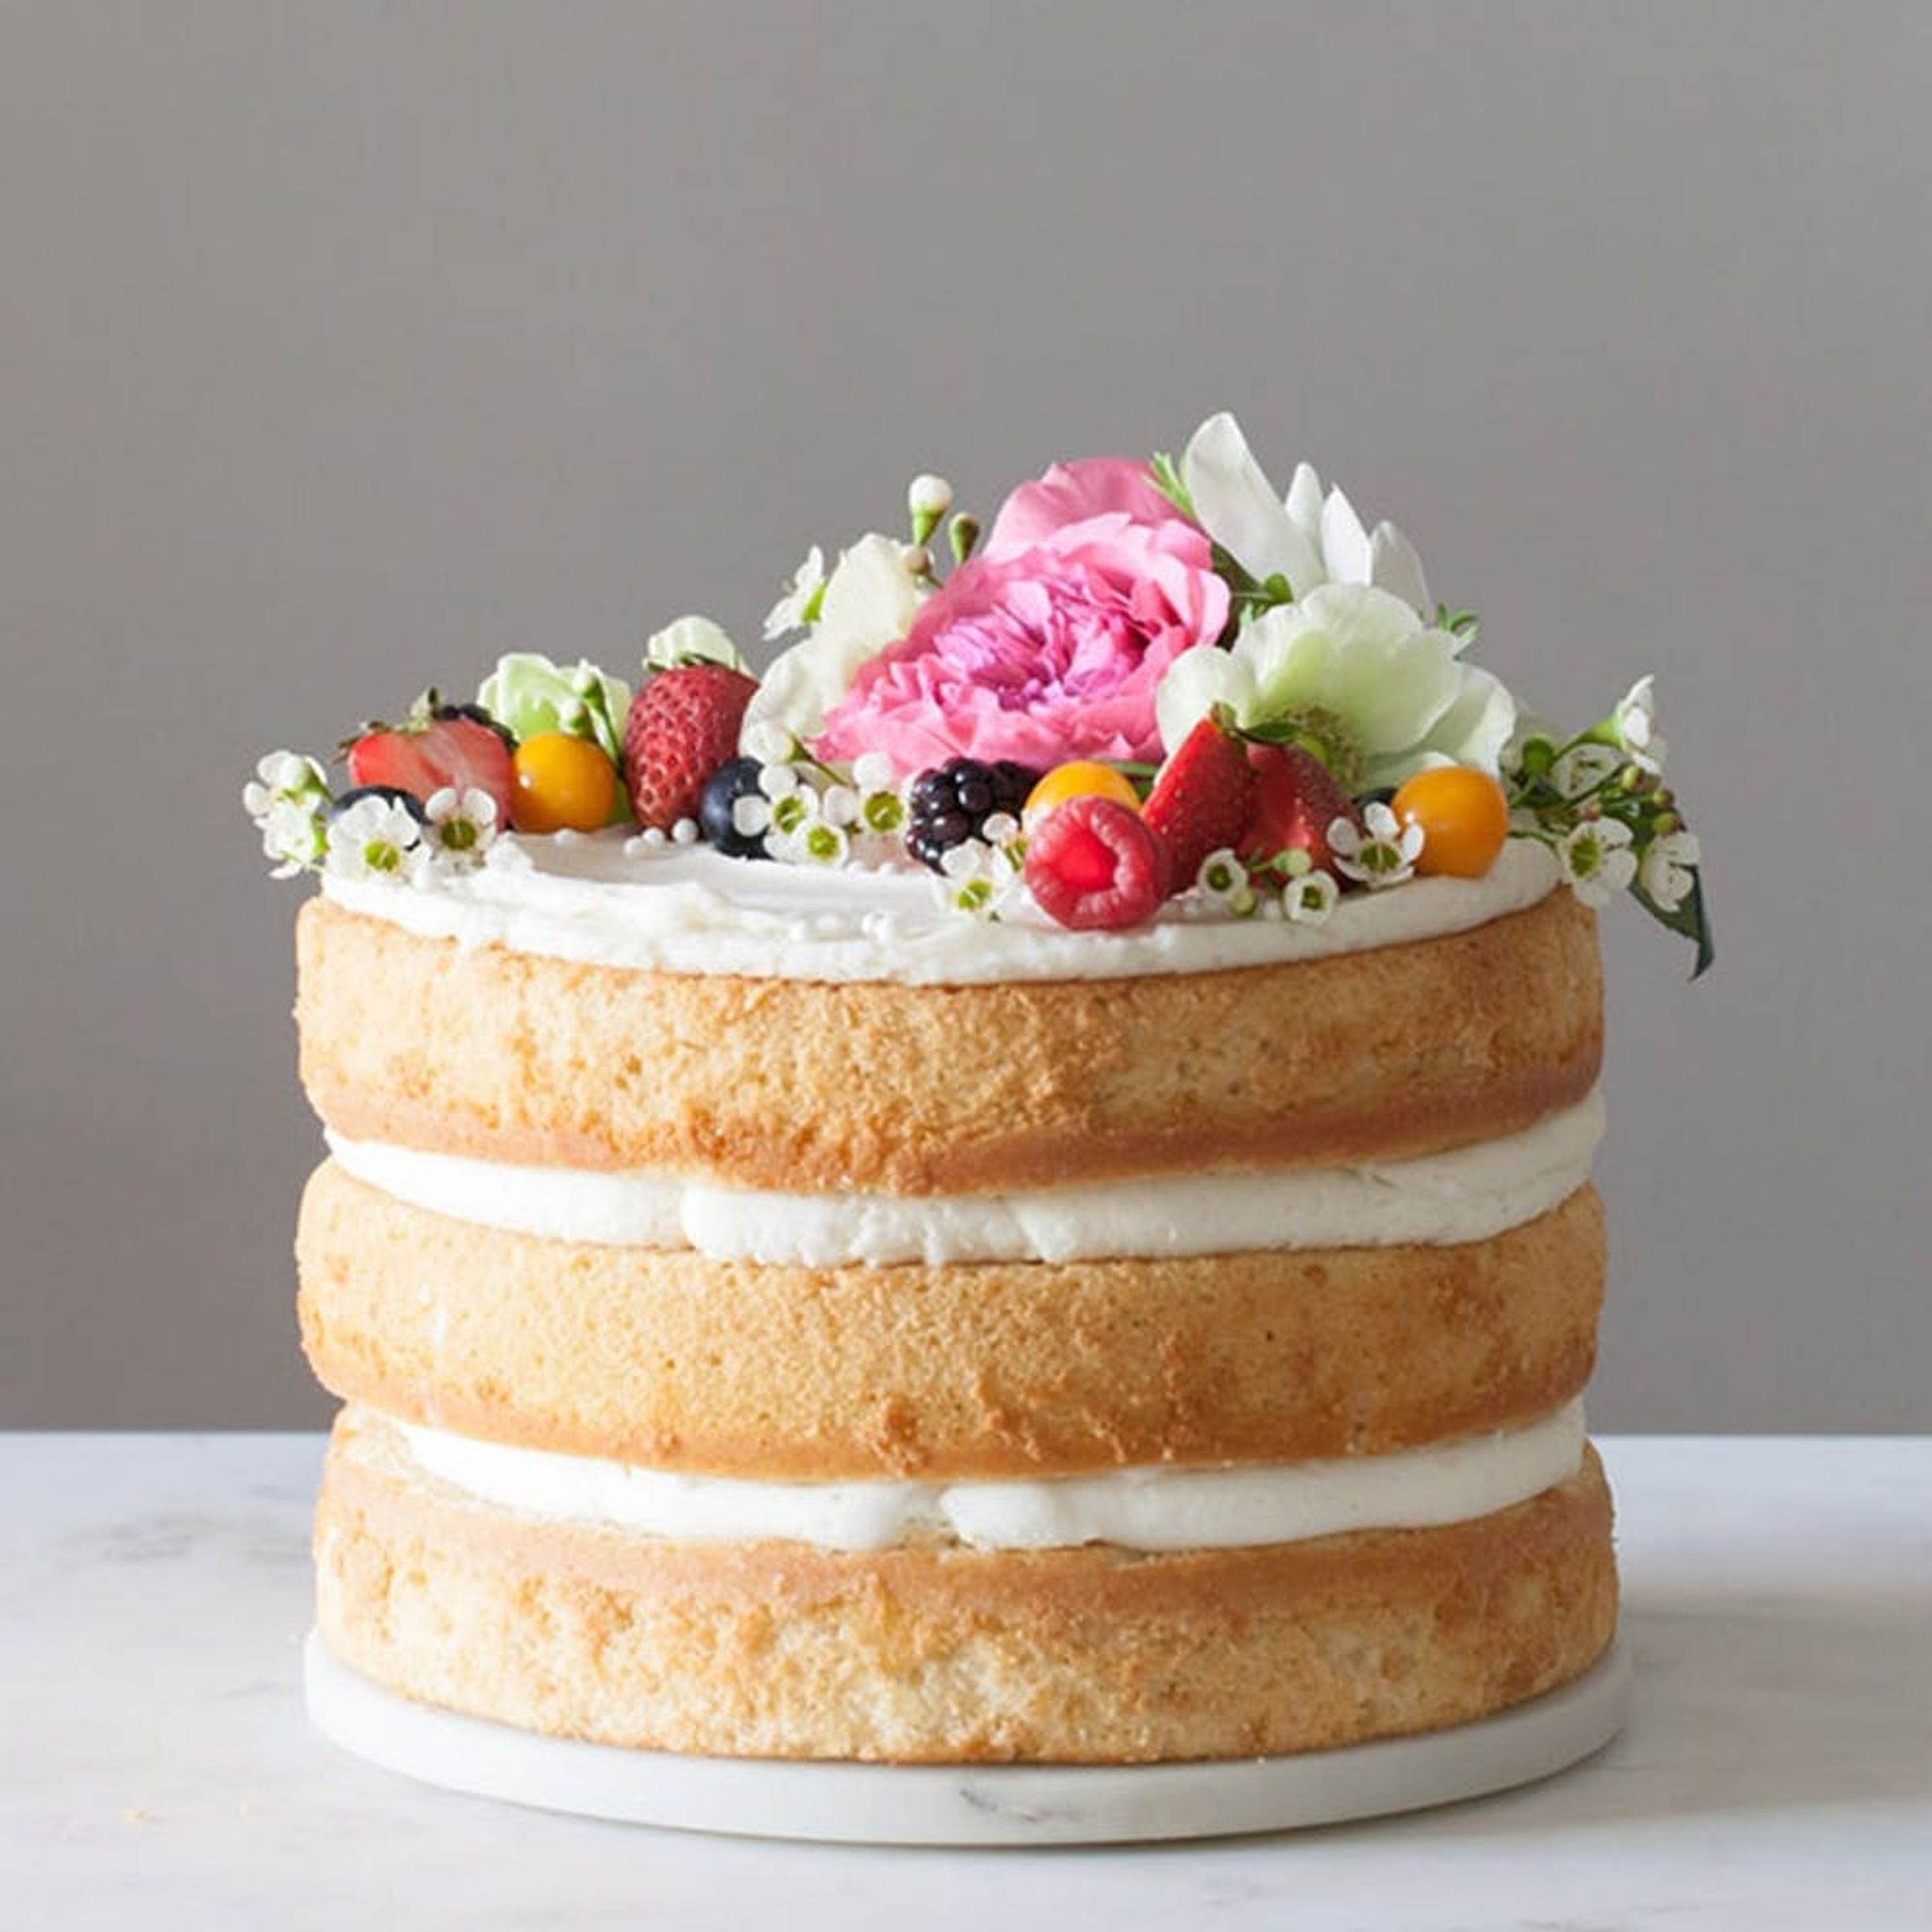 How to Ditch the Fondant and Make Your Own Naked Wedding Cake